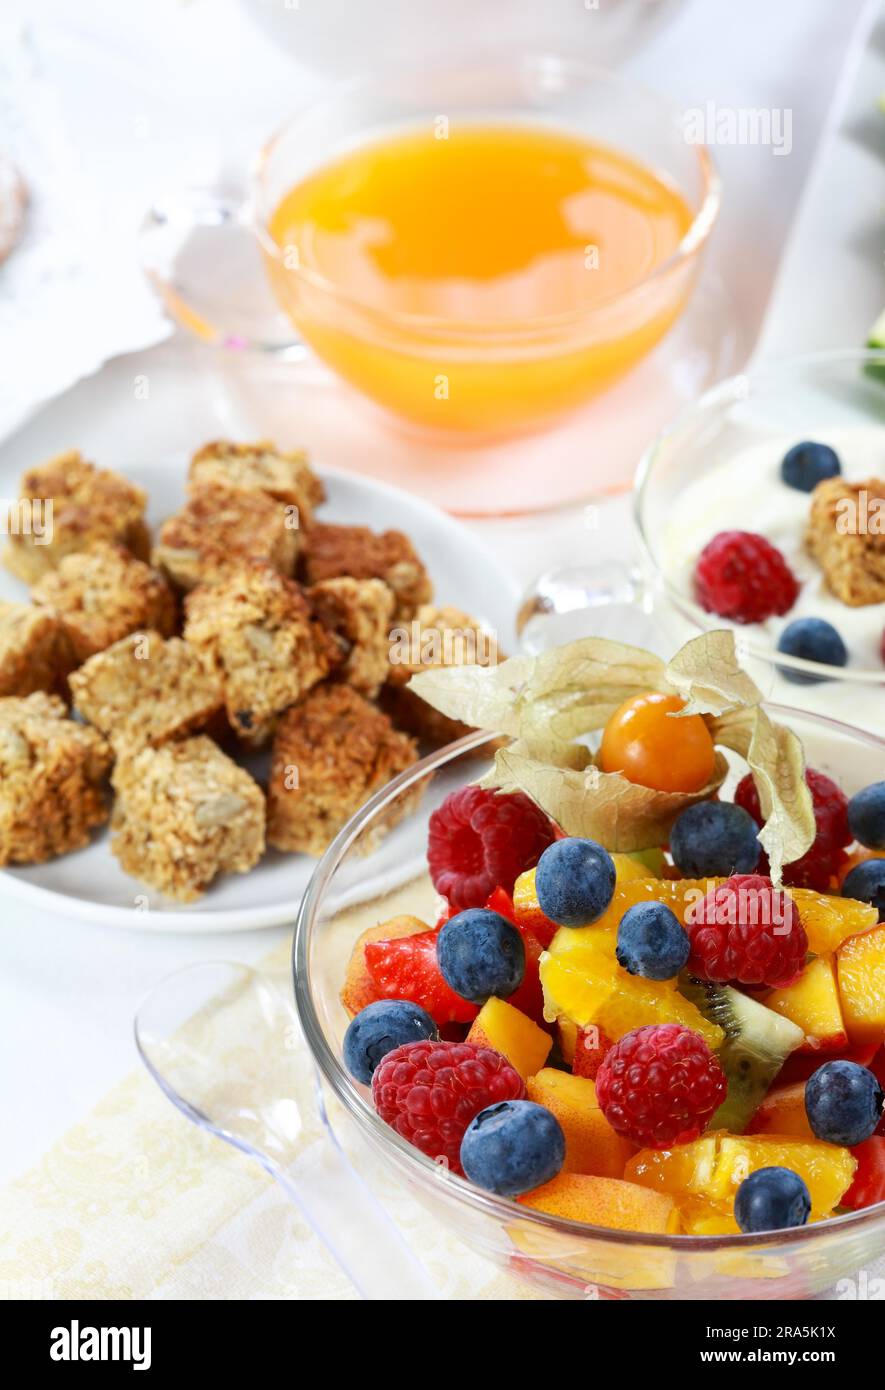 Healthy breakfast with fruit salad Stock Photo